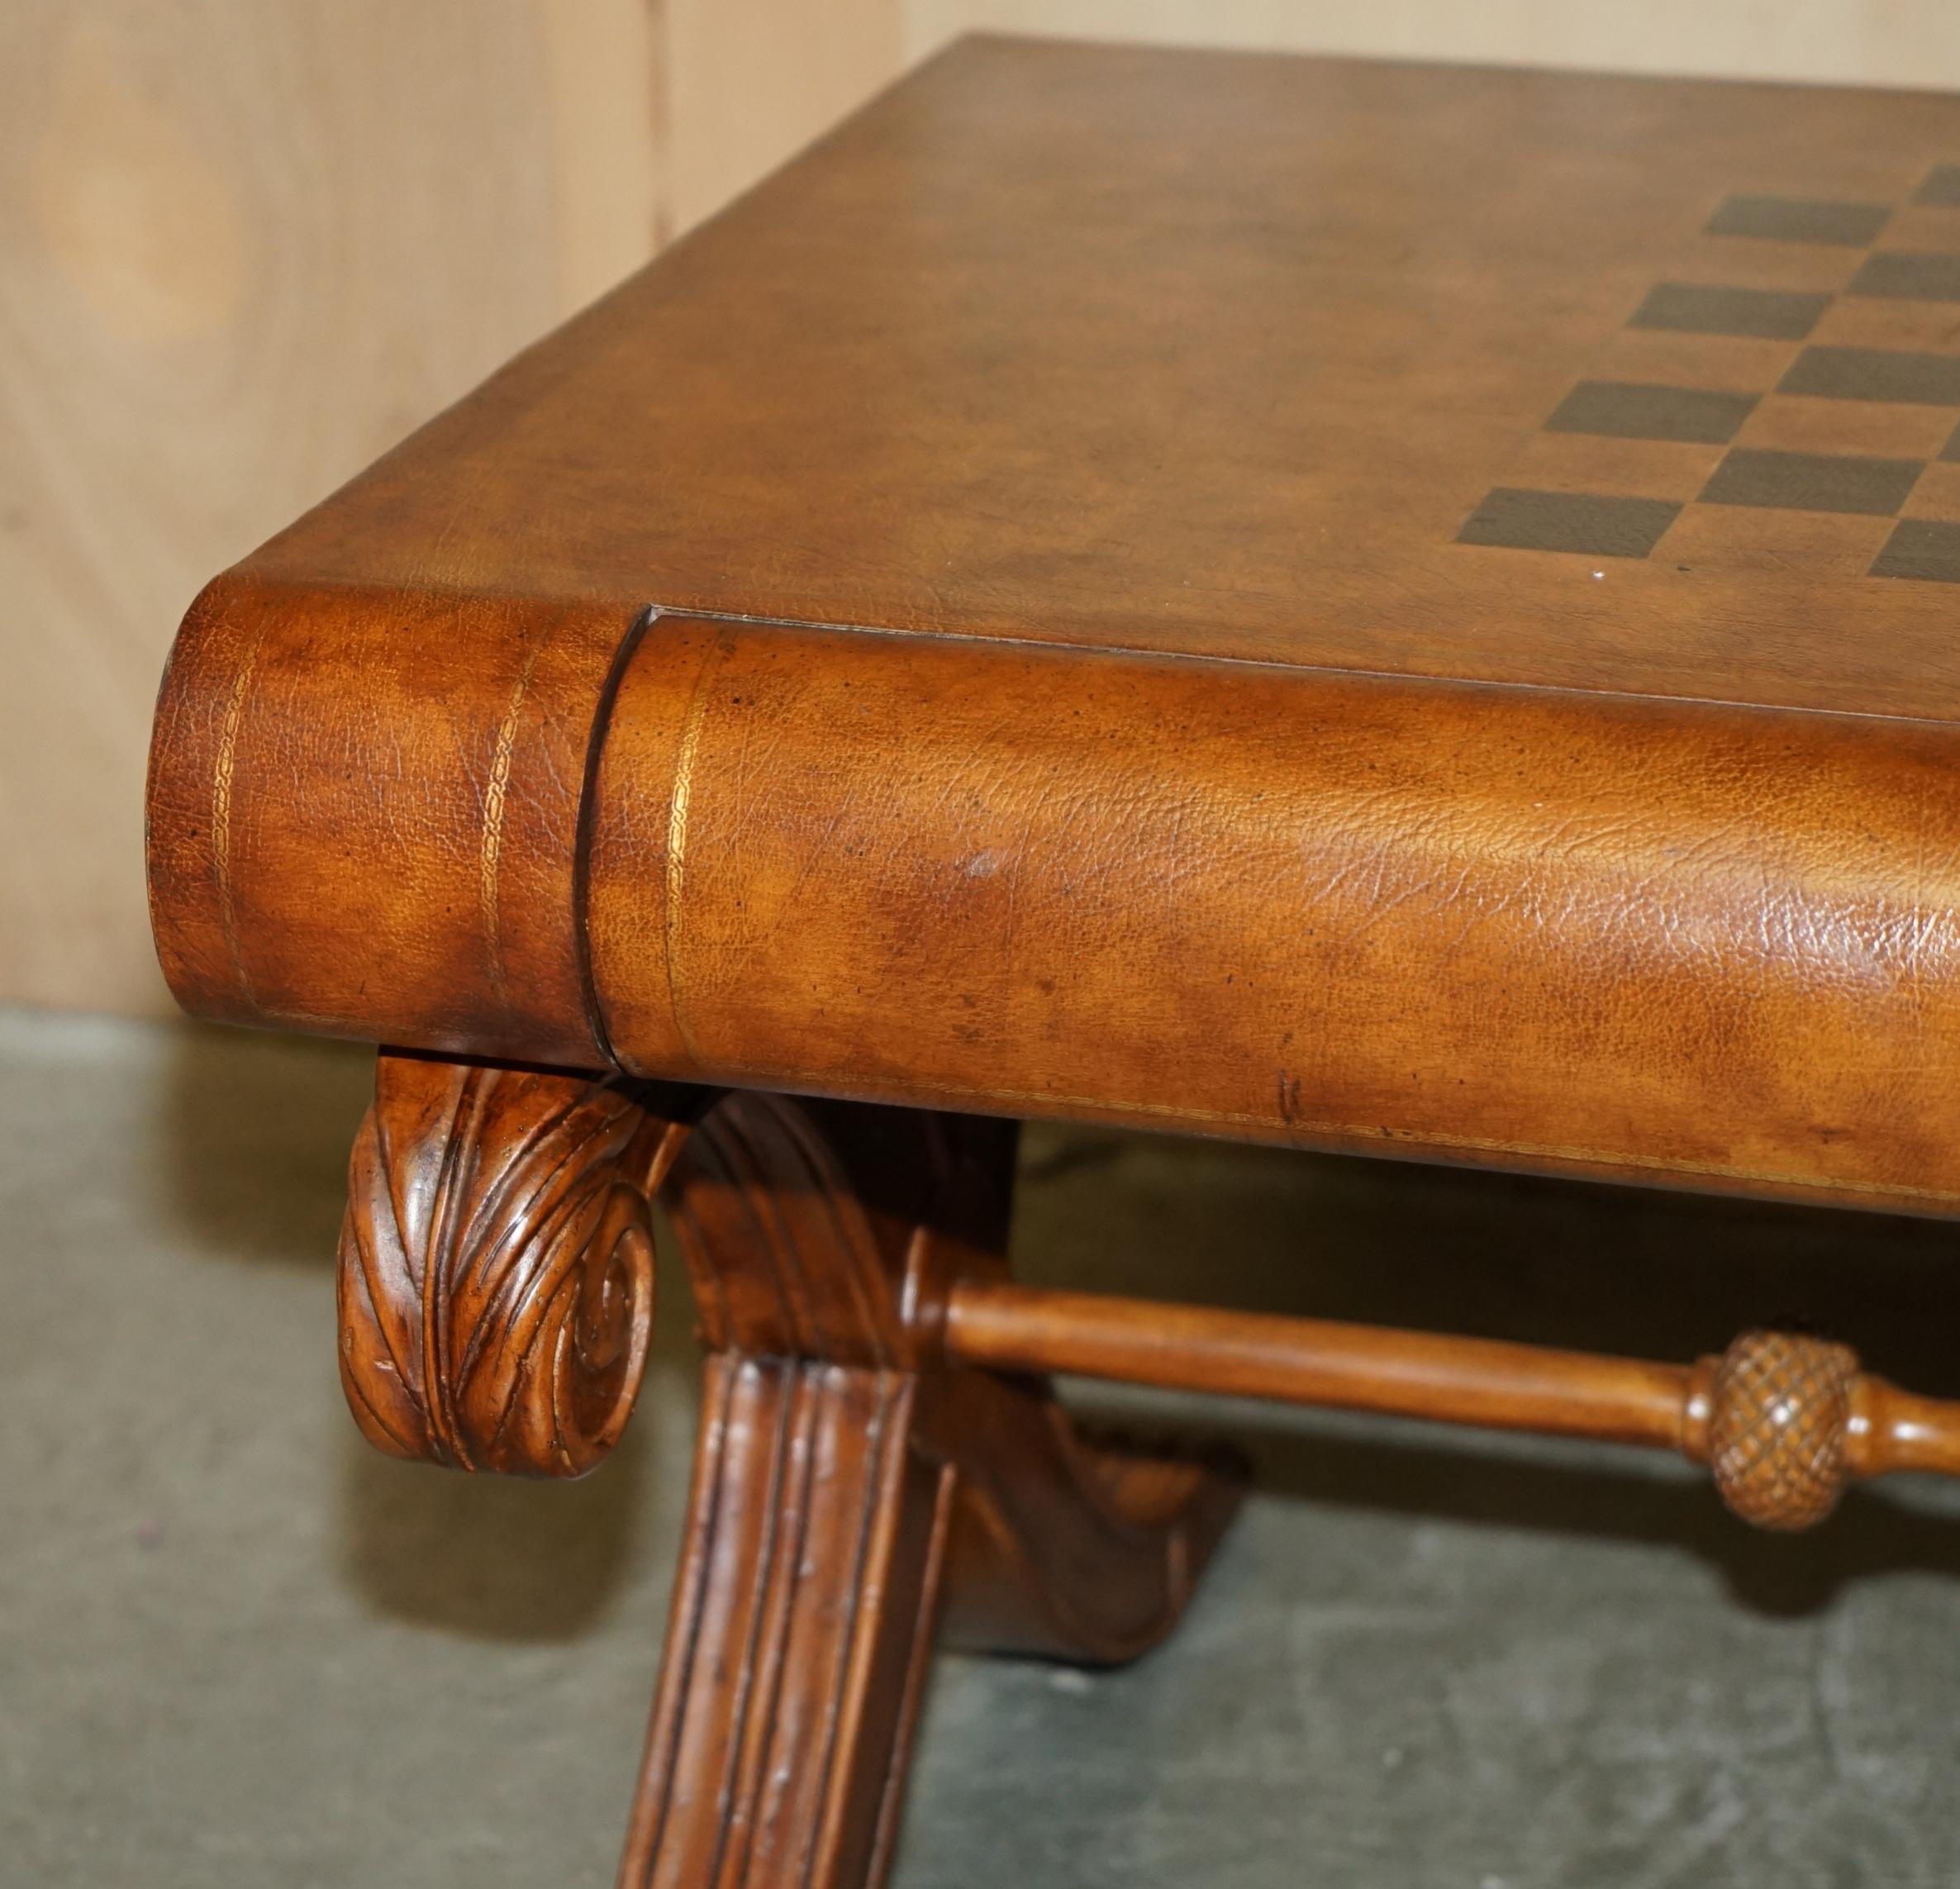 STUNNiNG HANDDYED BROWN LEATHER SCHOLARS BOOK CHESSBOARD CHESS COFFEE TABLE im Angebot 1